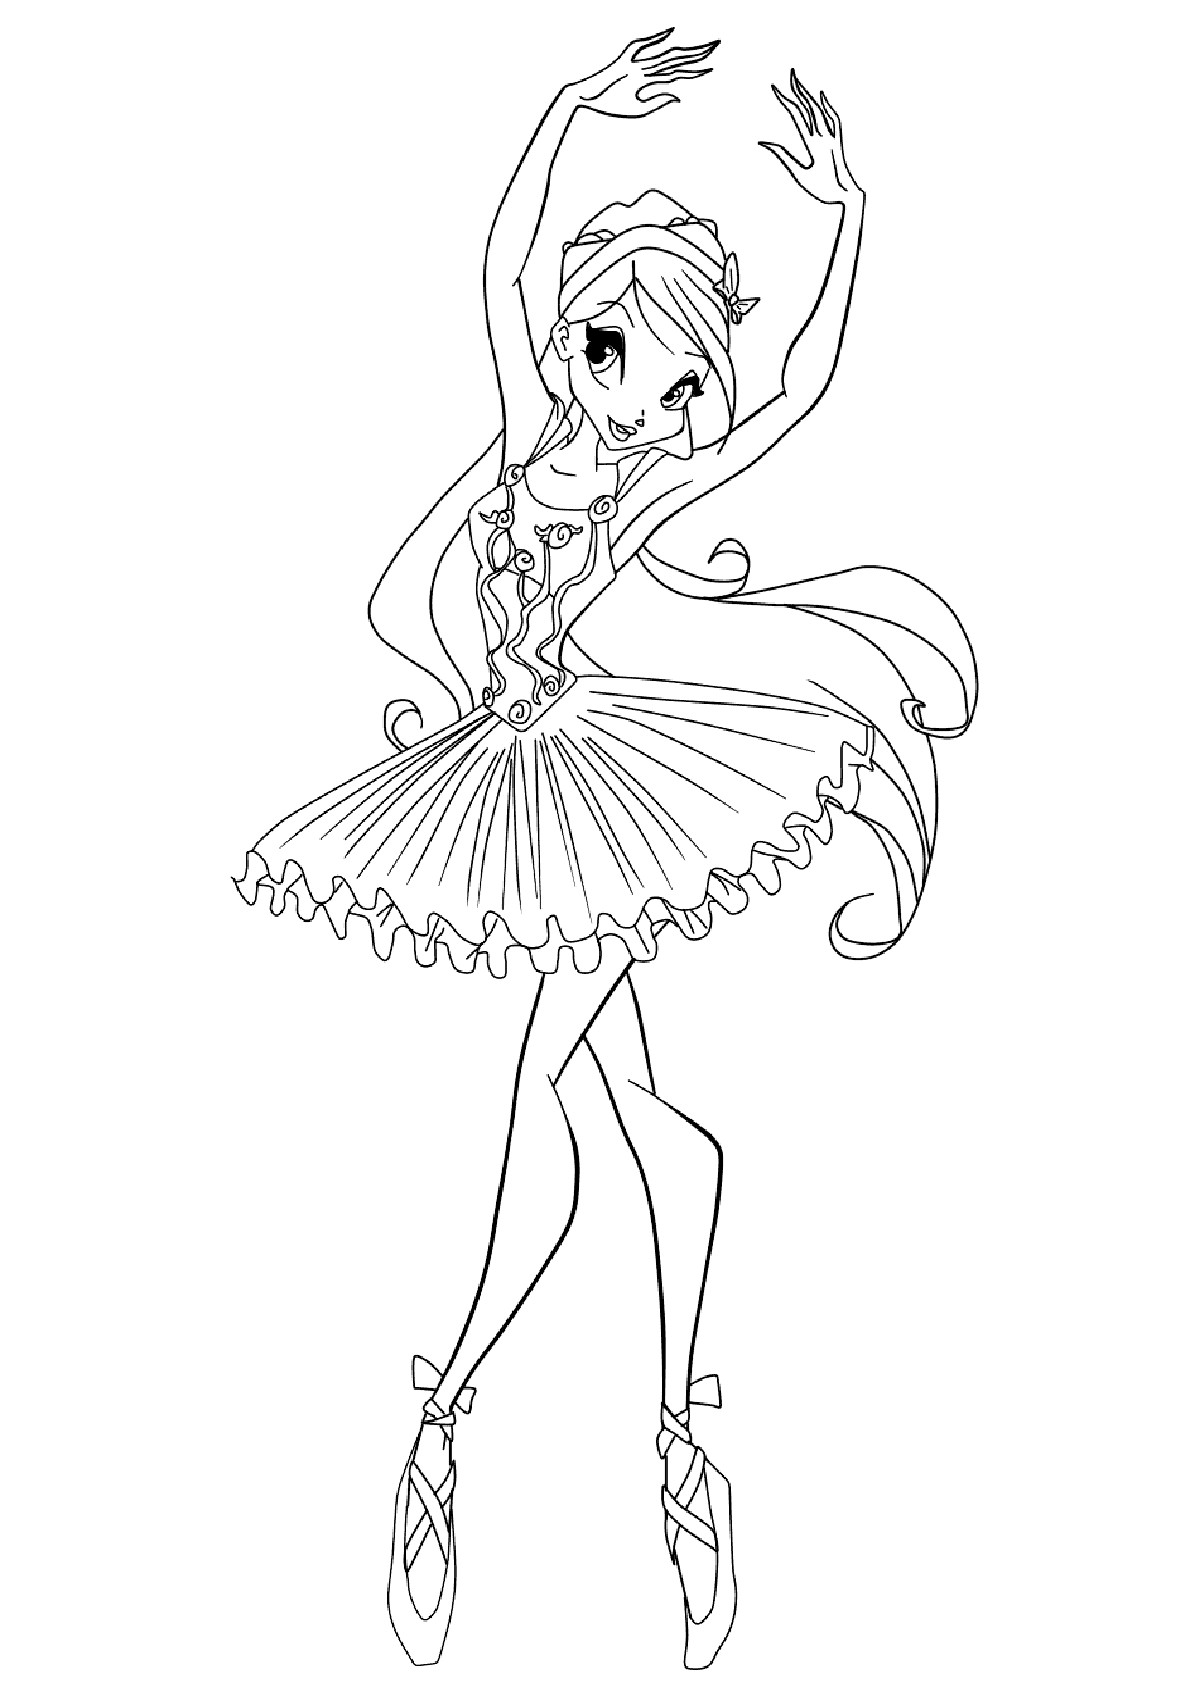 Printable Coloring Pages For Girls Dance
 Ballerina Coloring Pages for childrens printable for free